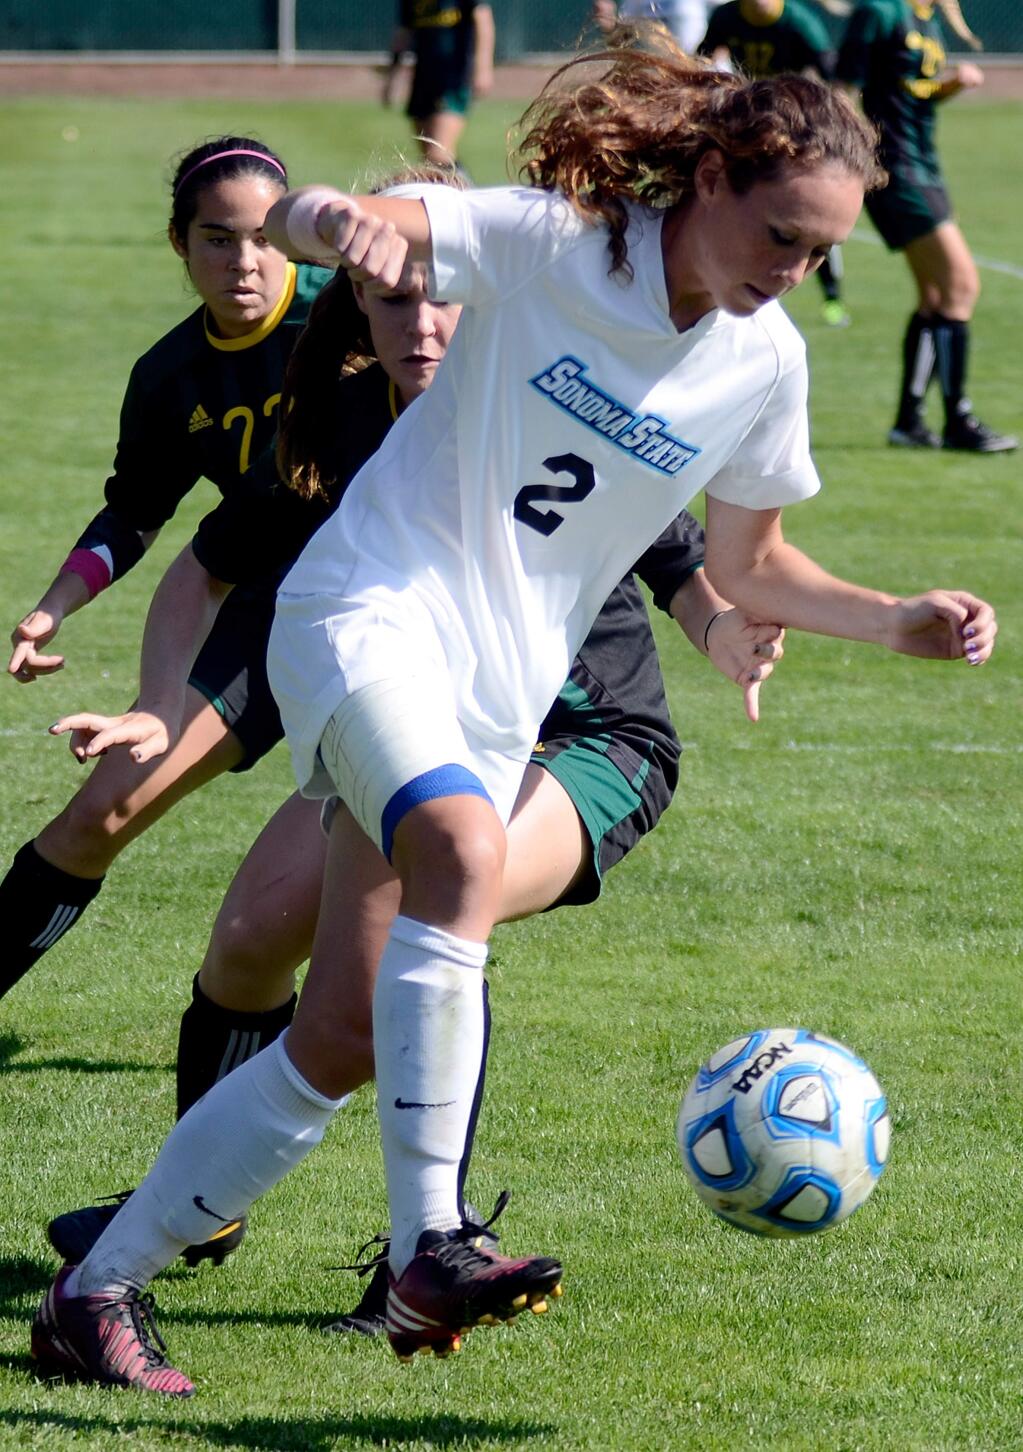 Sonoma State's Cara Curtin maintains possession of the ball during a women's soccer match between Sonoma State and Humboldt State universities, in Rohnert Park, Calif., on October 25, 2013. (Alvin Jornada / The Press Democrat)